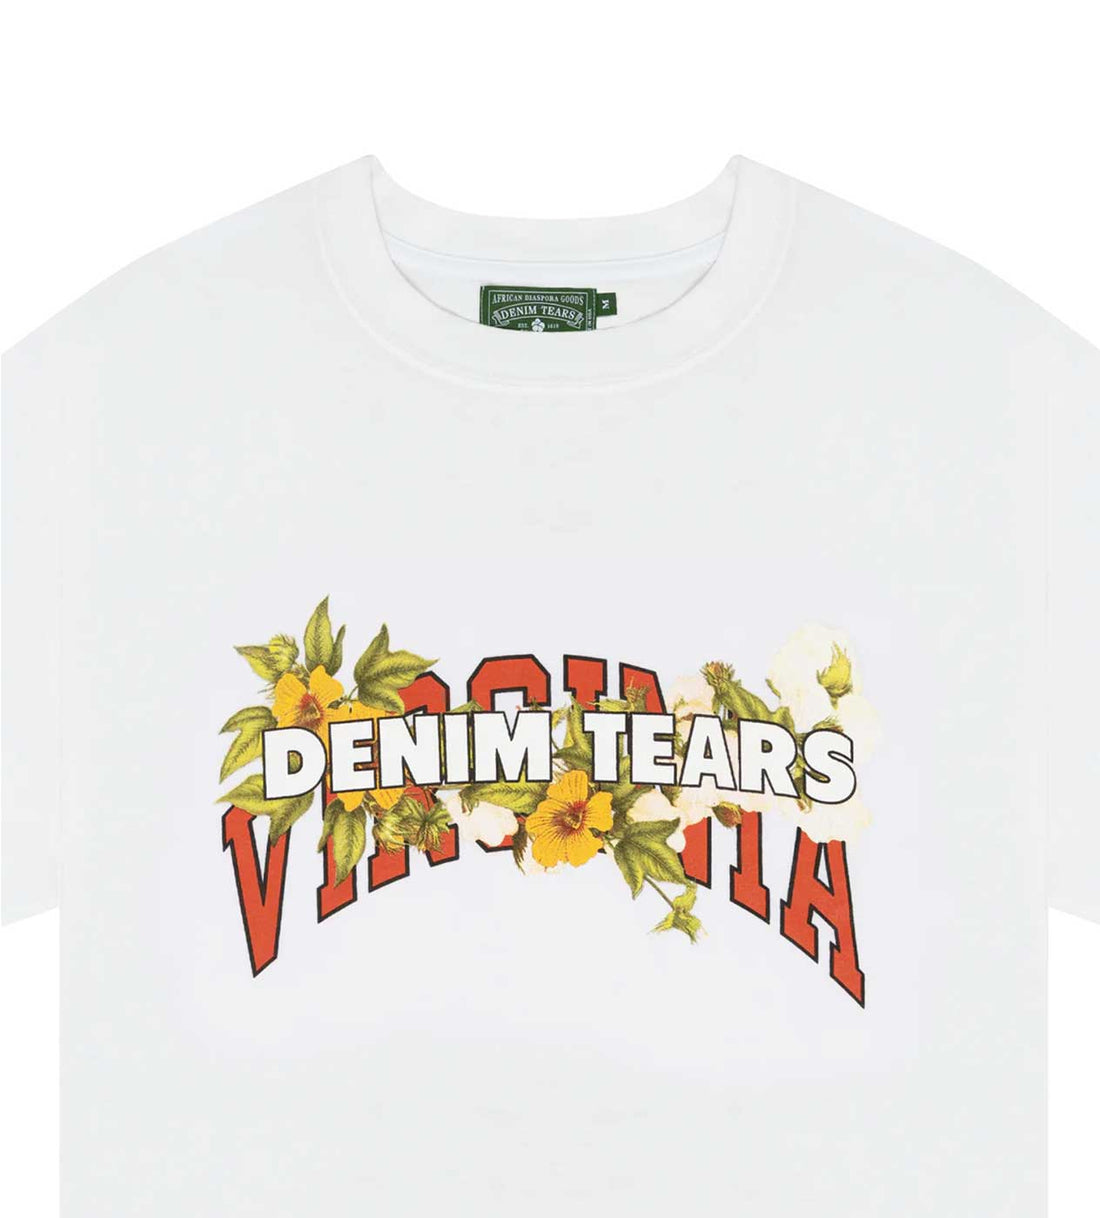 Product Image Of Denim Tears Virginia White Tee Close Up Front View